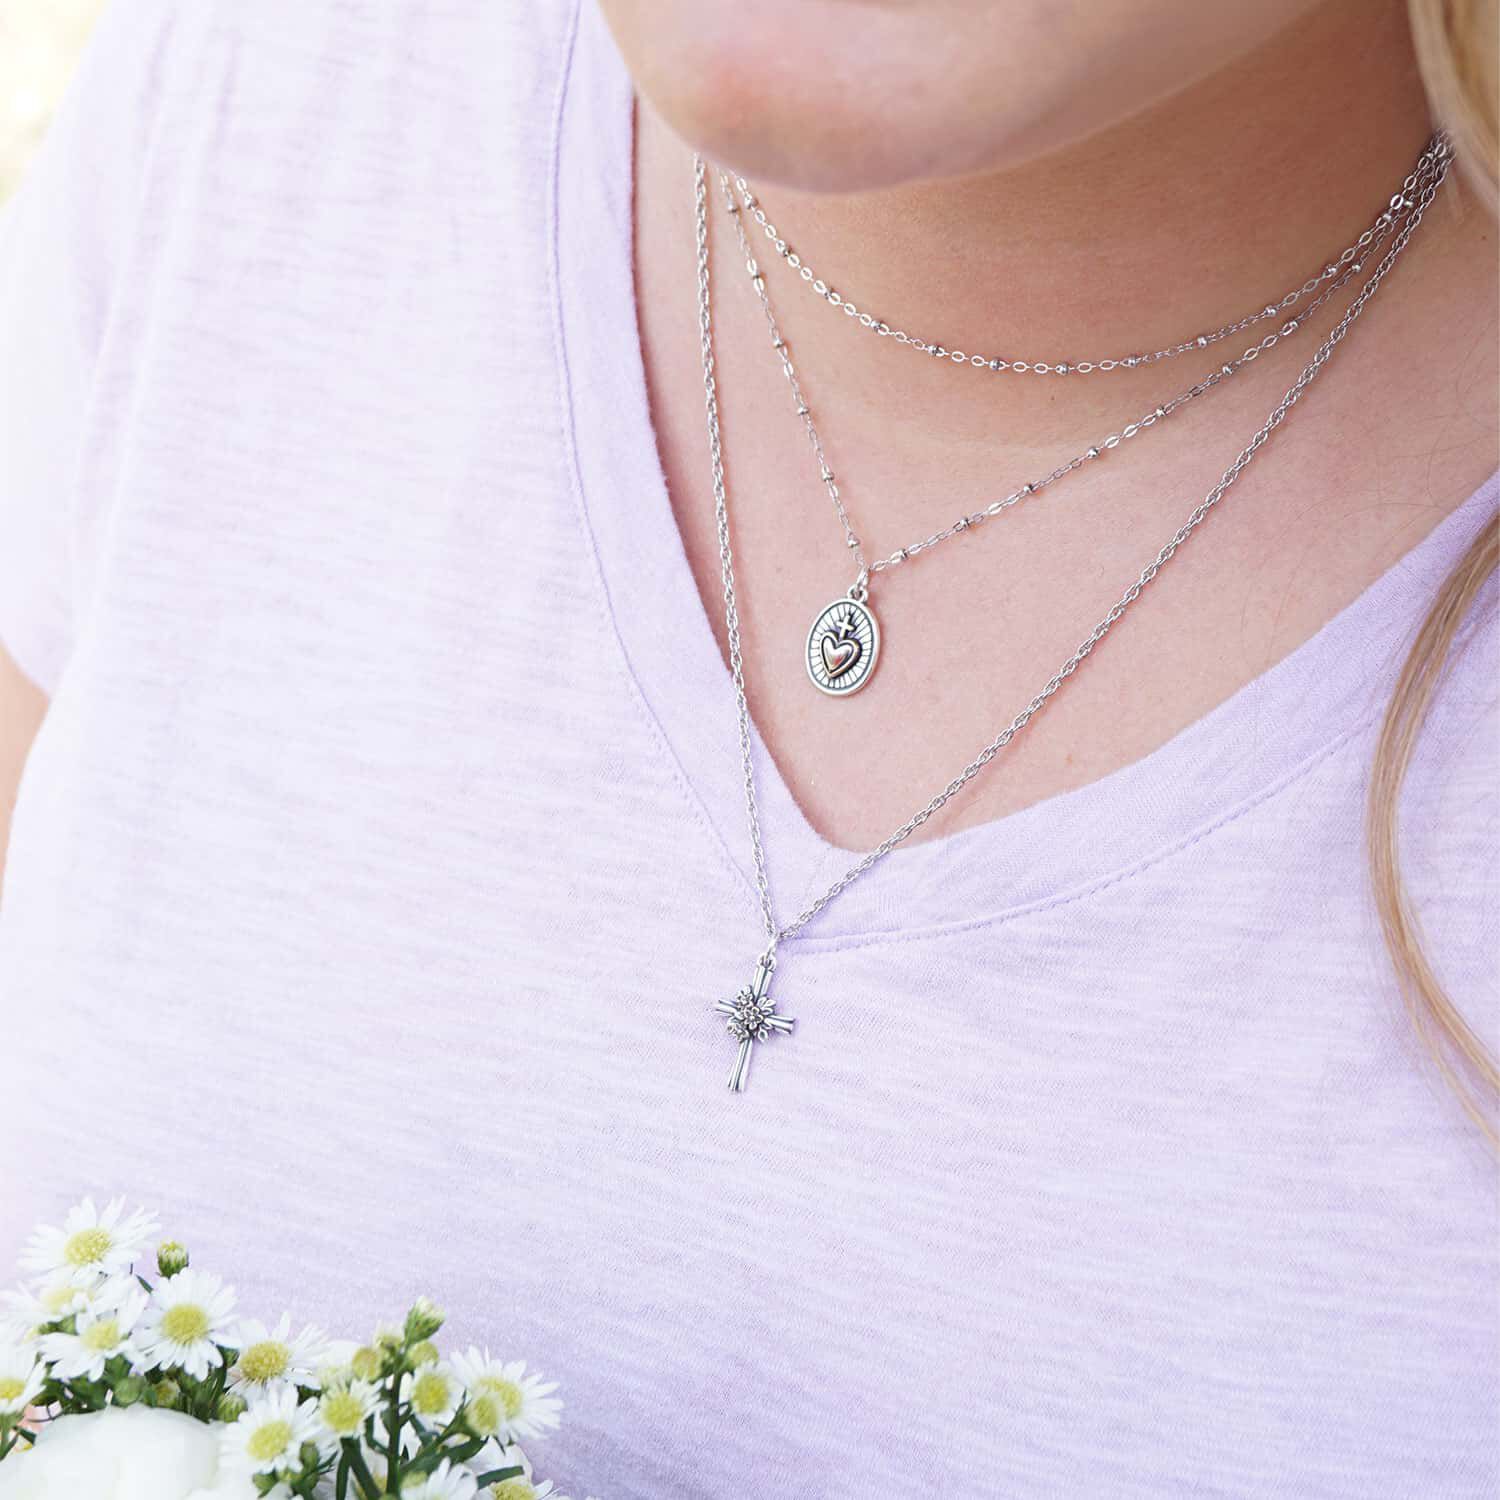 Model wearing layered necklaces featuring sterling silver and bronze faith designs. 